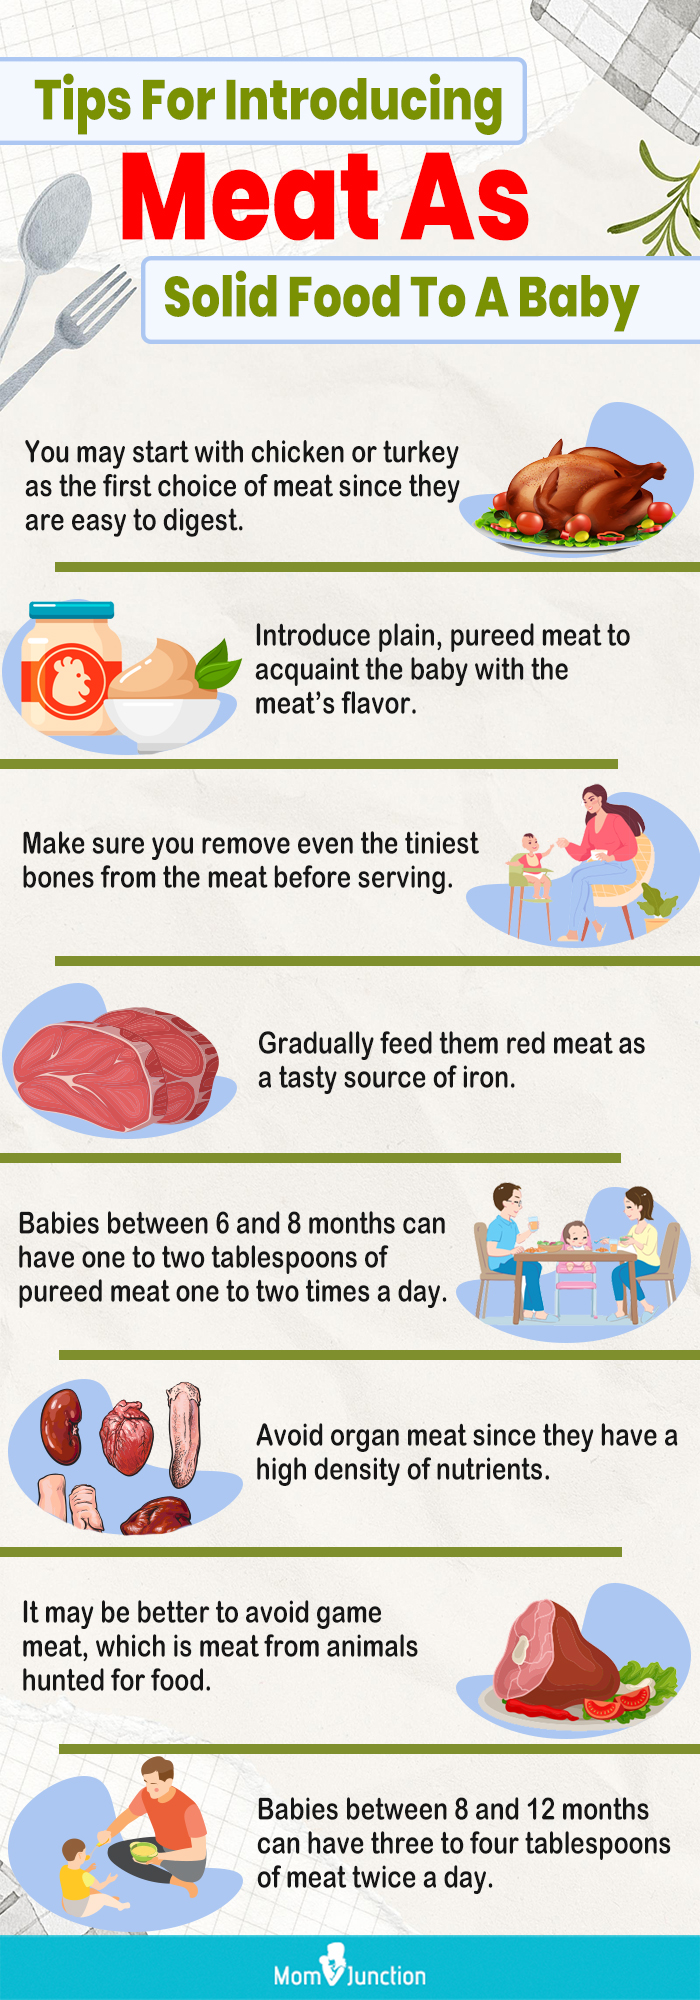 tips for introducing meat for babies (infographic)